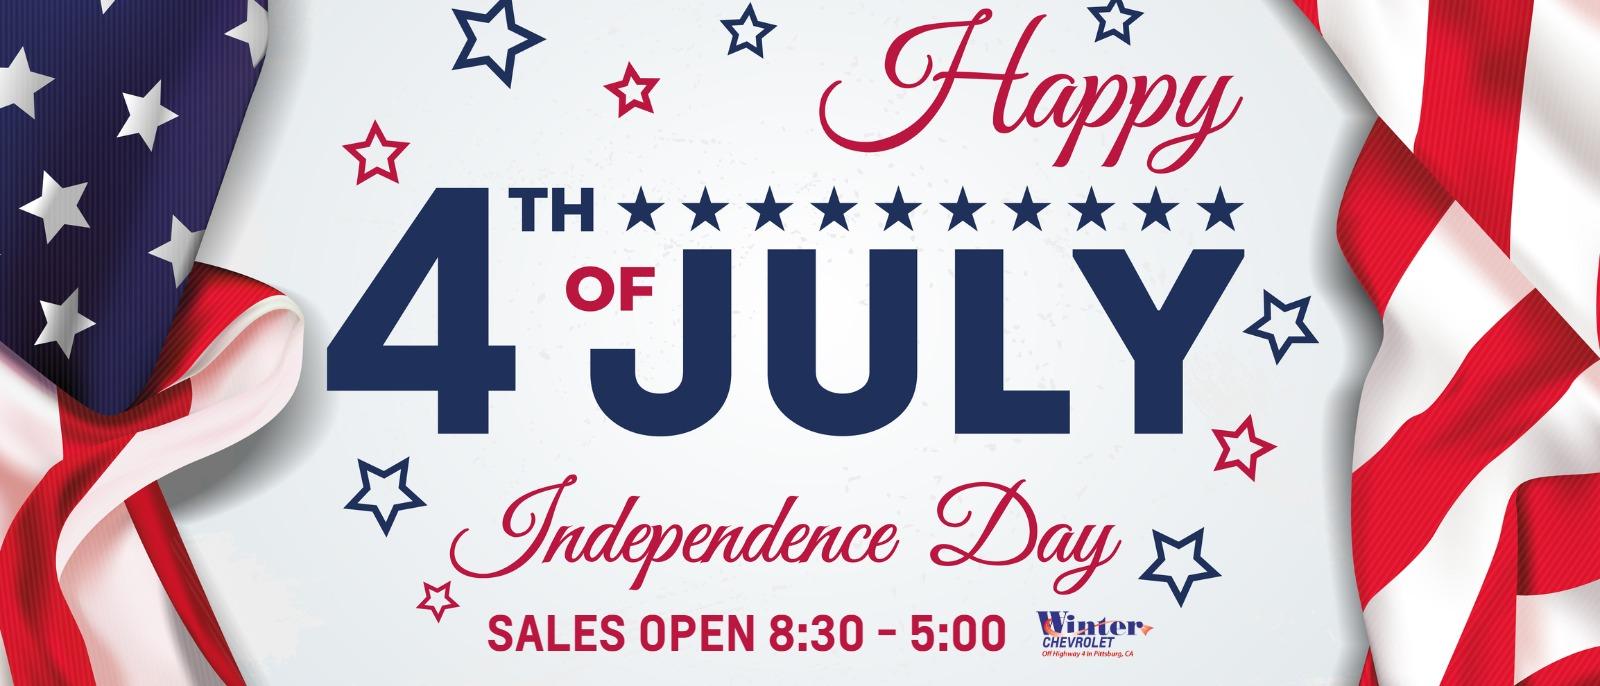 happy 4th of July 
Sales open 8:30 - 5:00